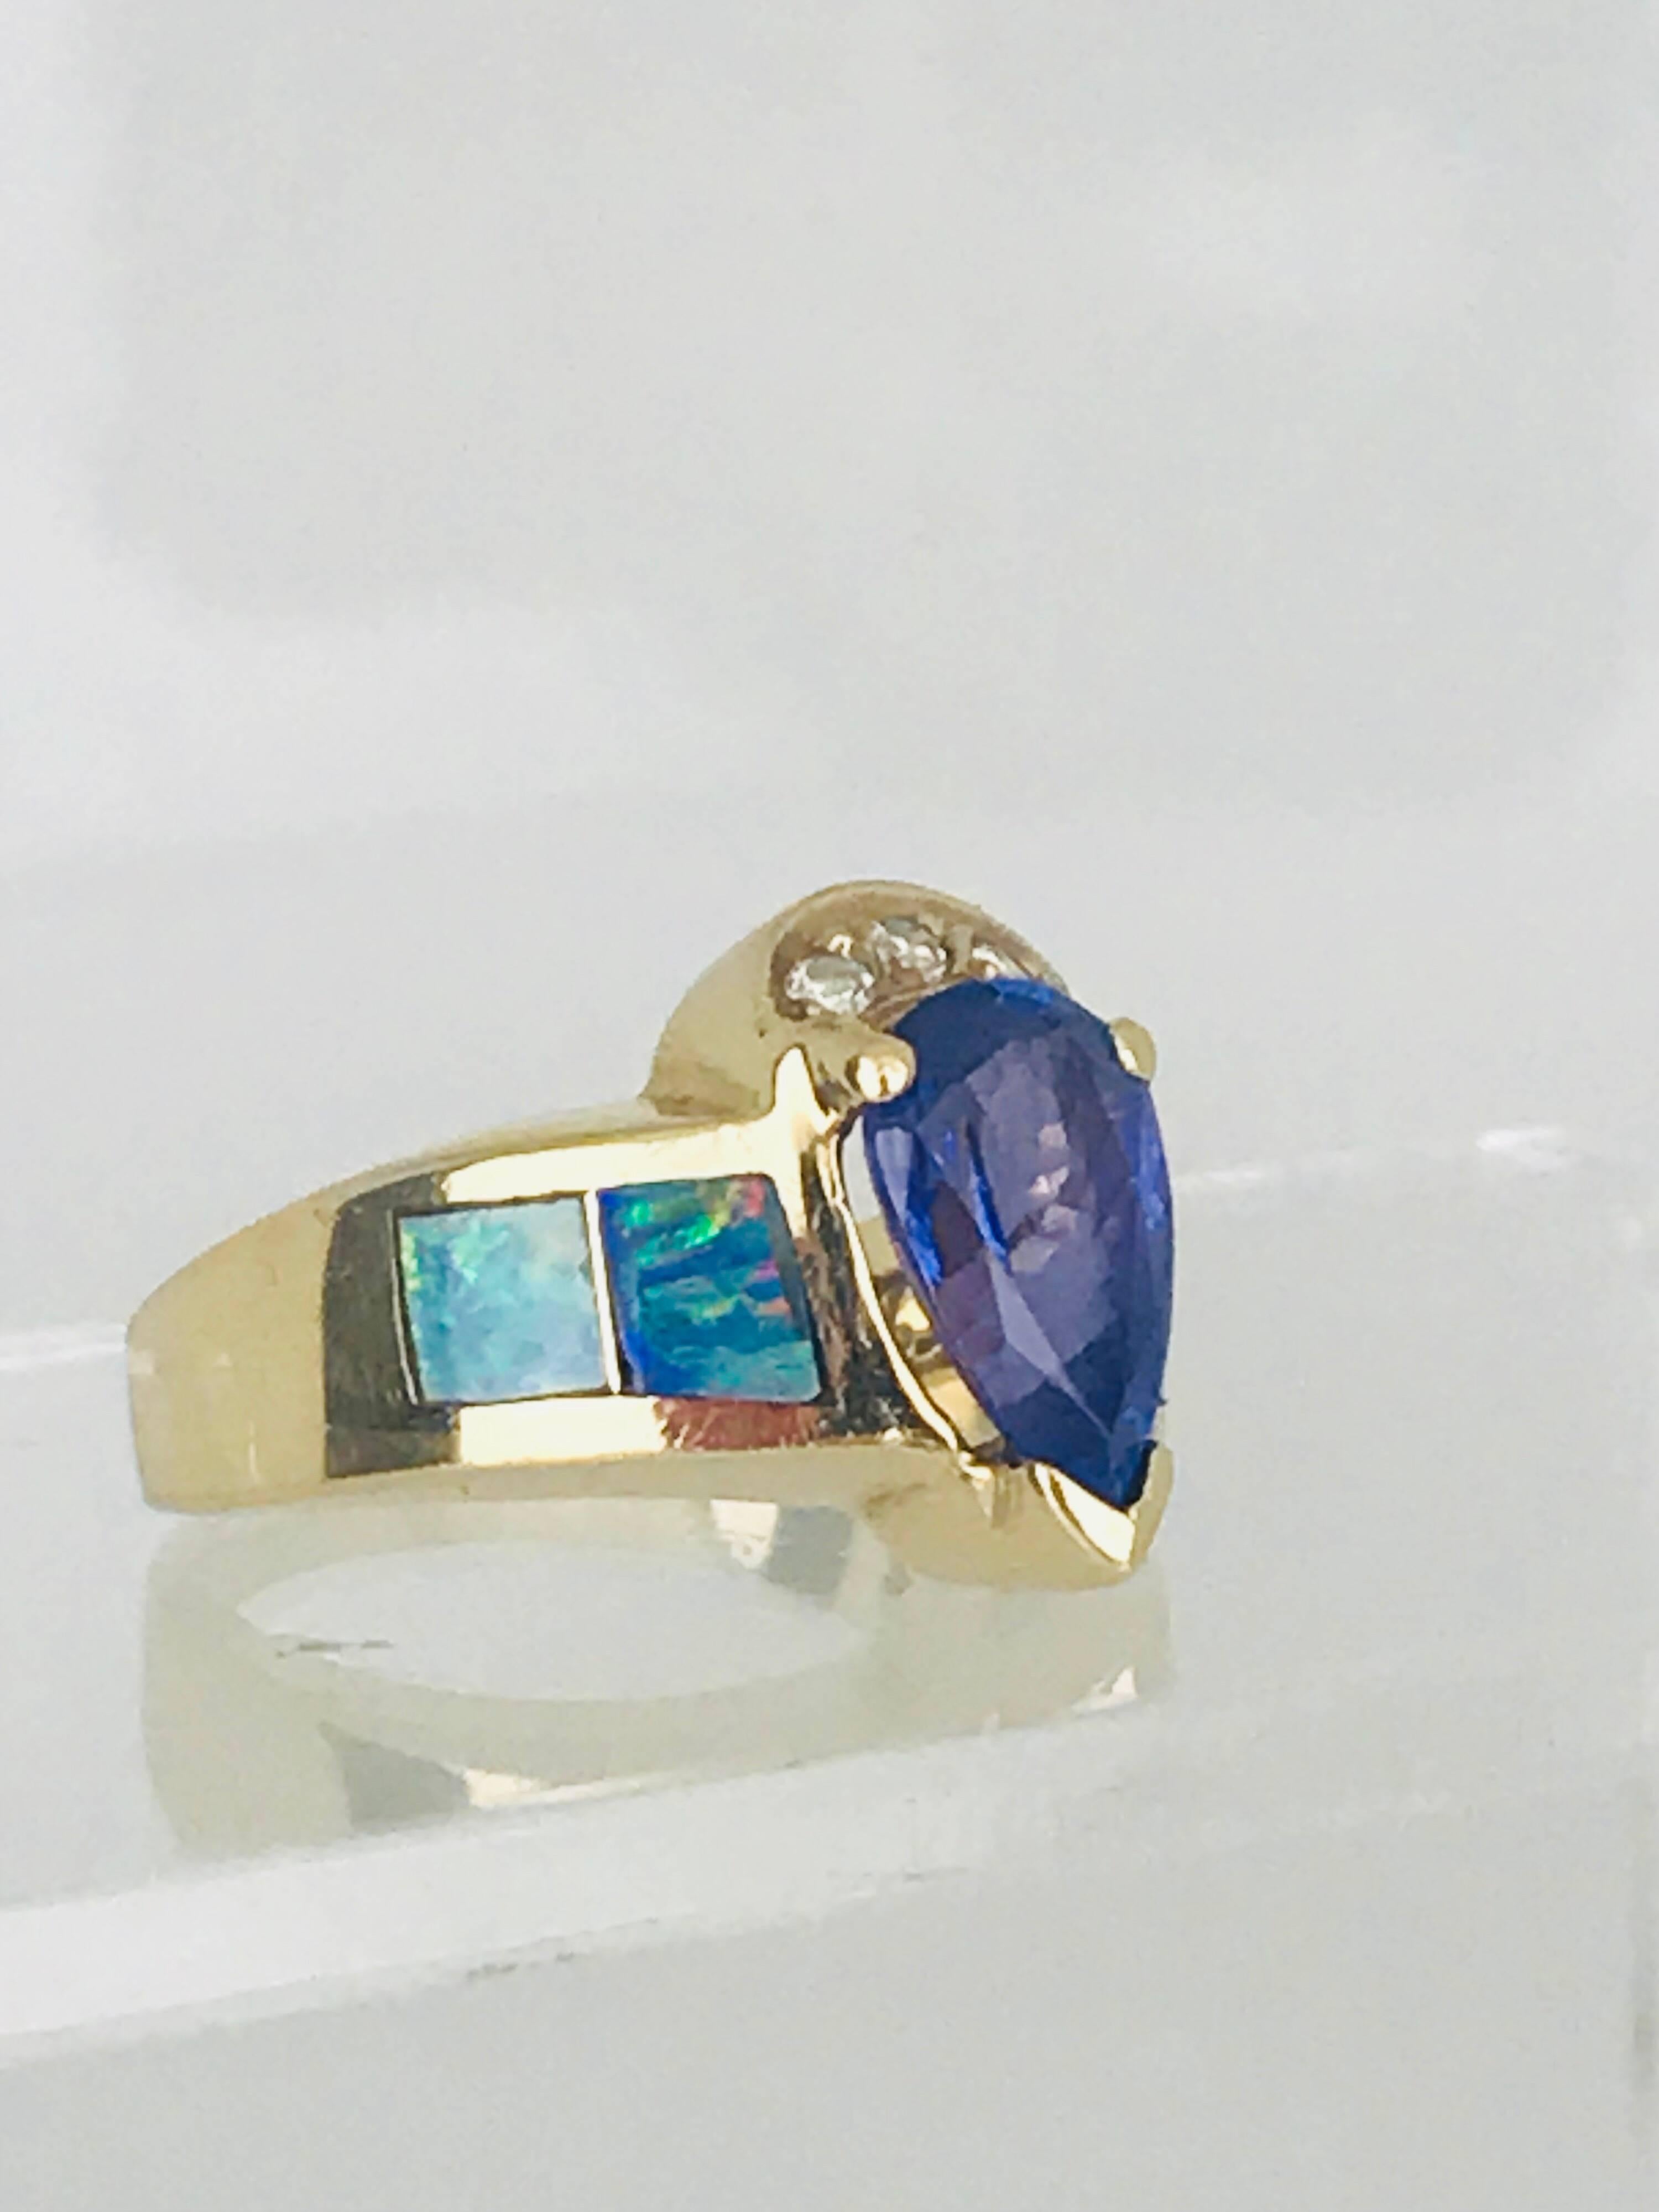 Tanzanite Pear Shaped Ring, Set with Australian Opal and Diamond, circa 1985 In Good Condition For Sale In Aliso Viejo, CA